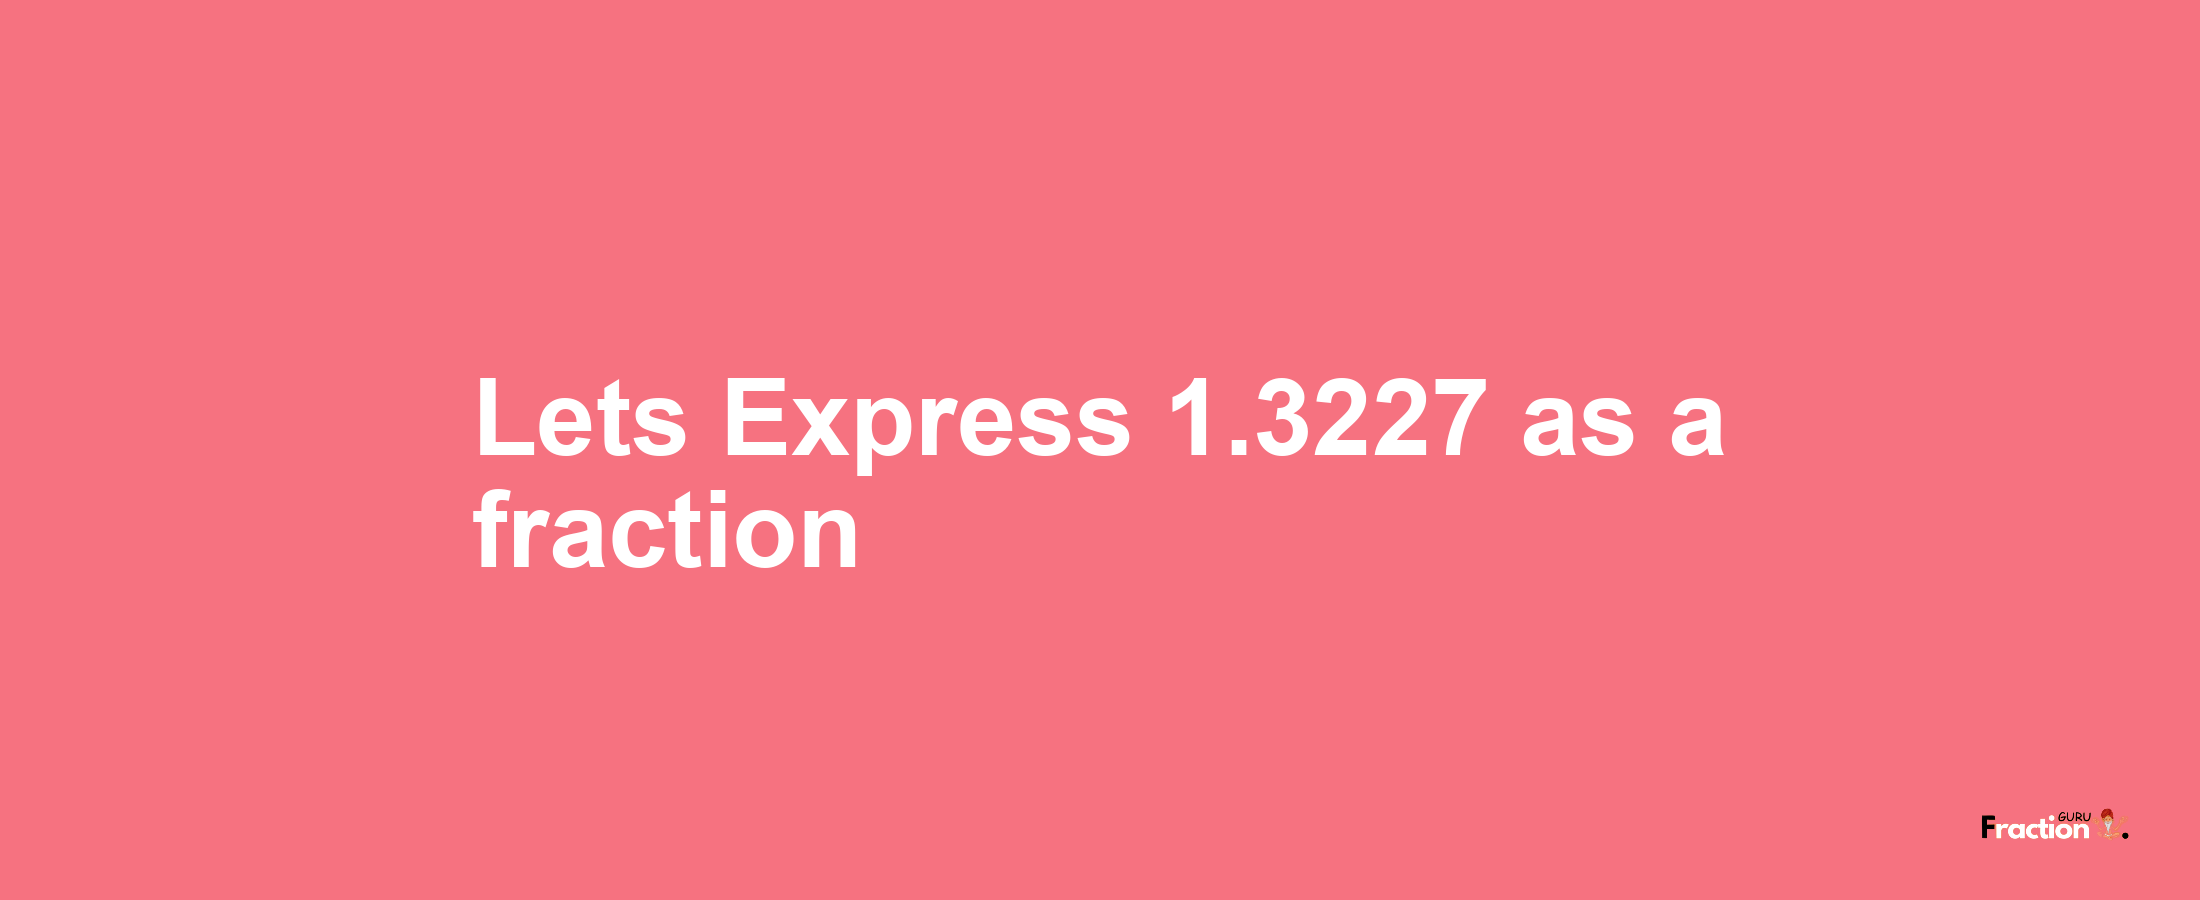 Lets Express 1.3227 as afraction